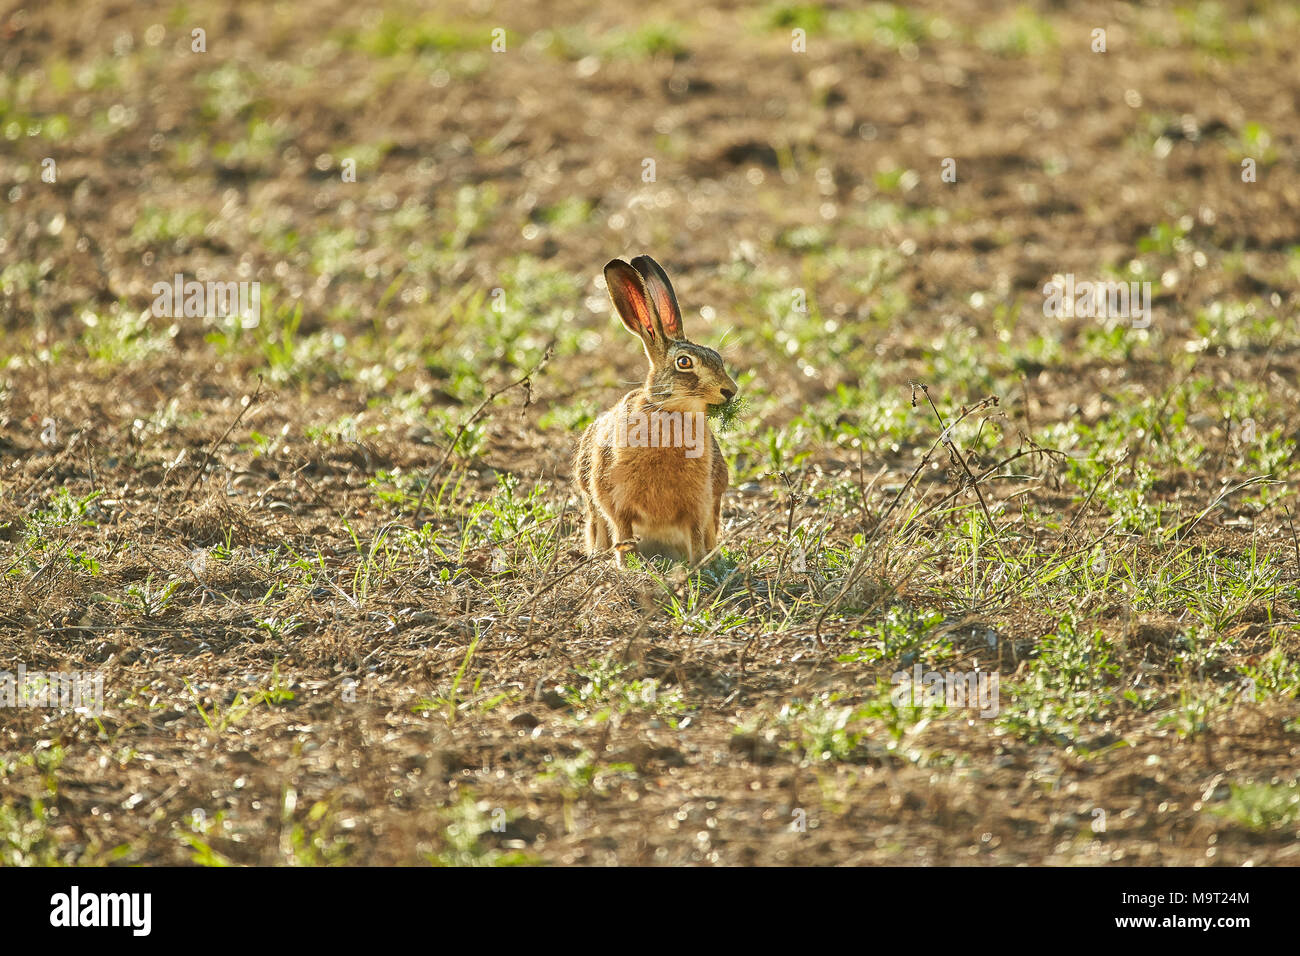 European Brown Hare (Lepus Europaeus) in a field looking startled and woundering what to do next, England, UK Stock Photo